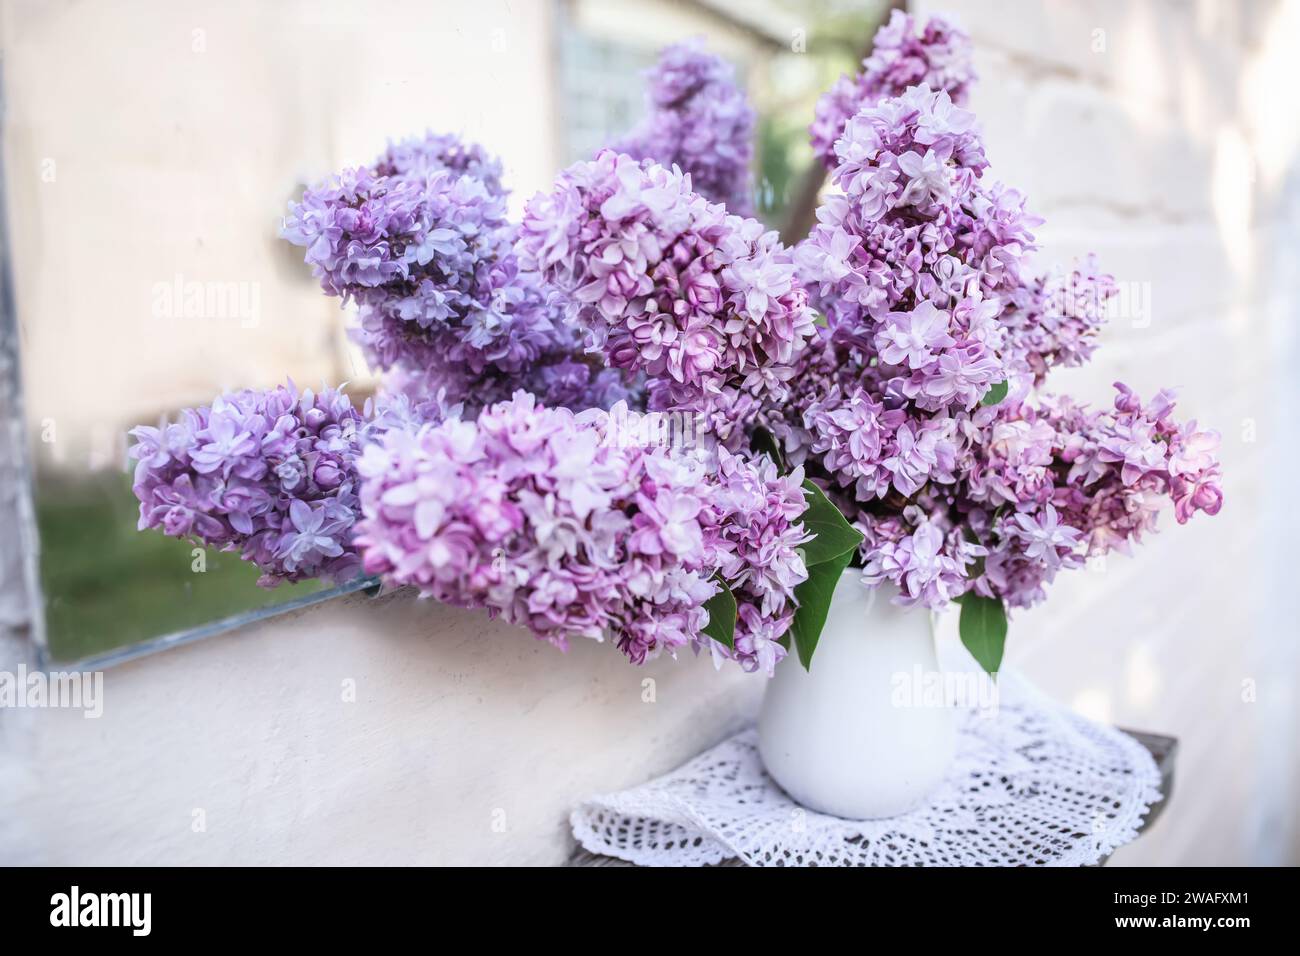 Bouquet of purple lilacs on a shelf near a vintage mirror. Reflection of flowers and courtyard in an old mirror. Home decor with spring flowers.. Stock Photo